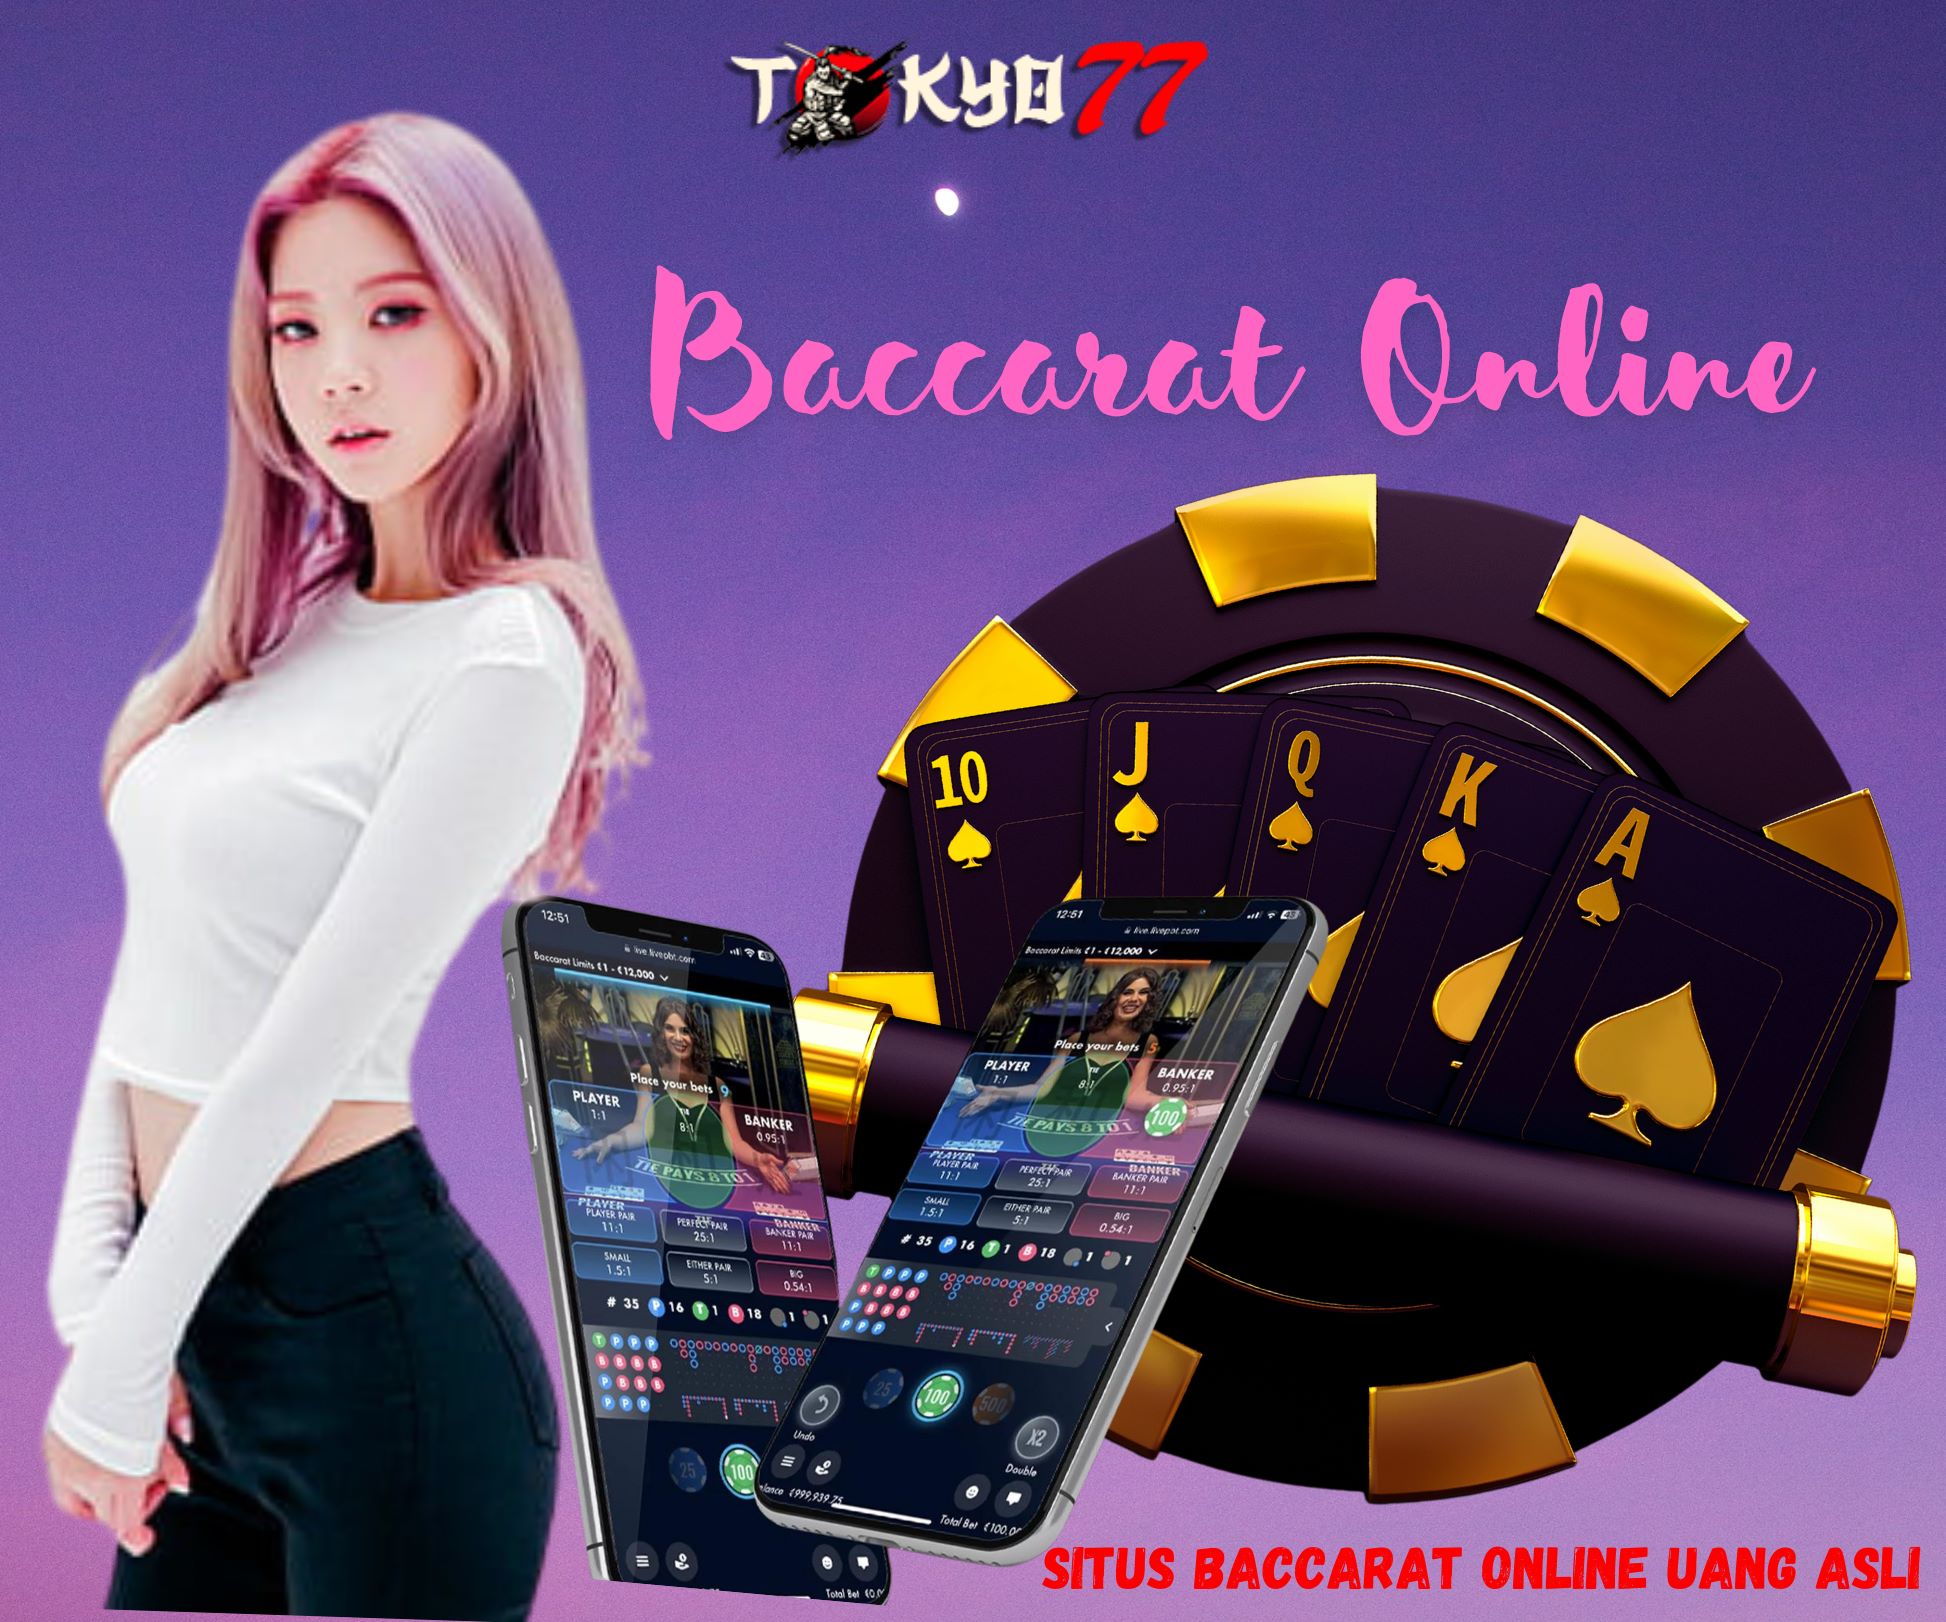 Effective Tricks to Win Big from Online Baccarat